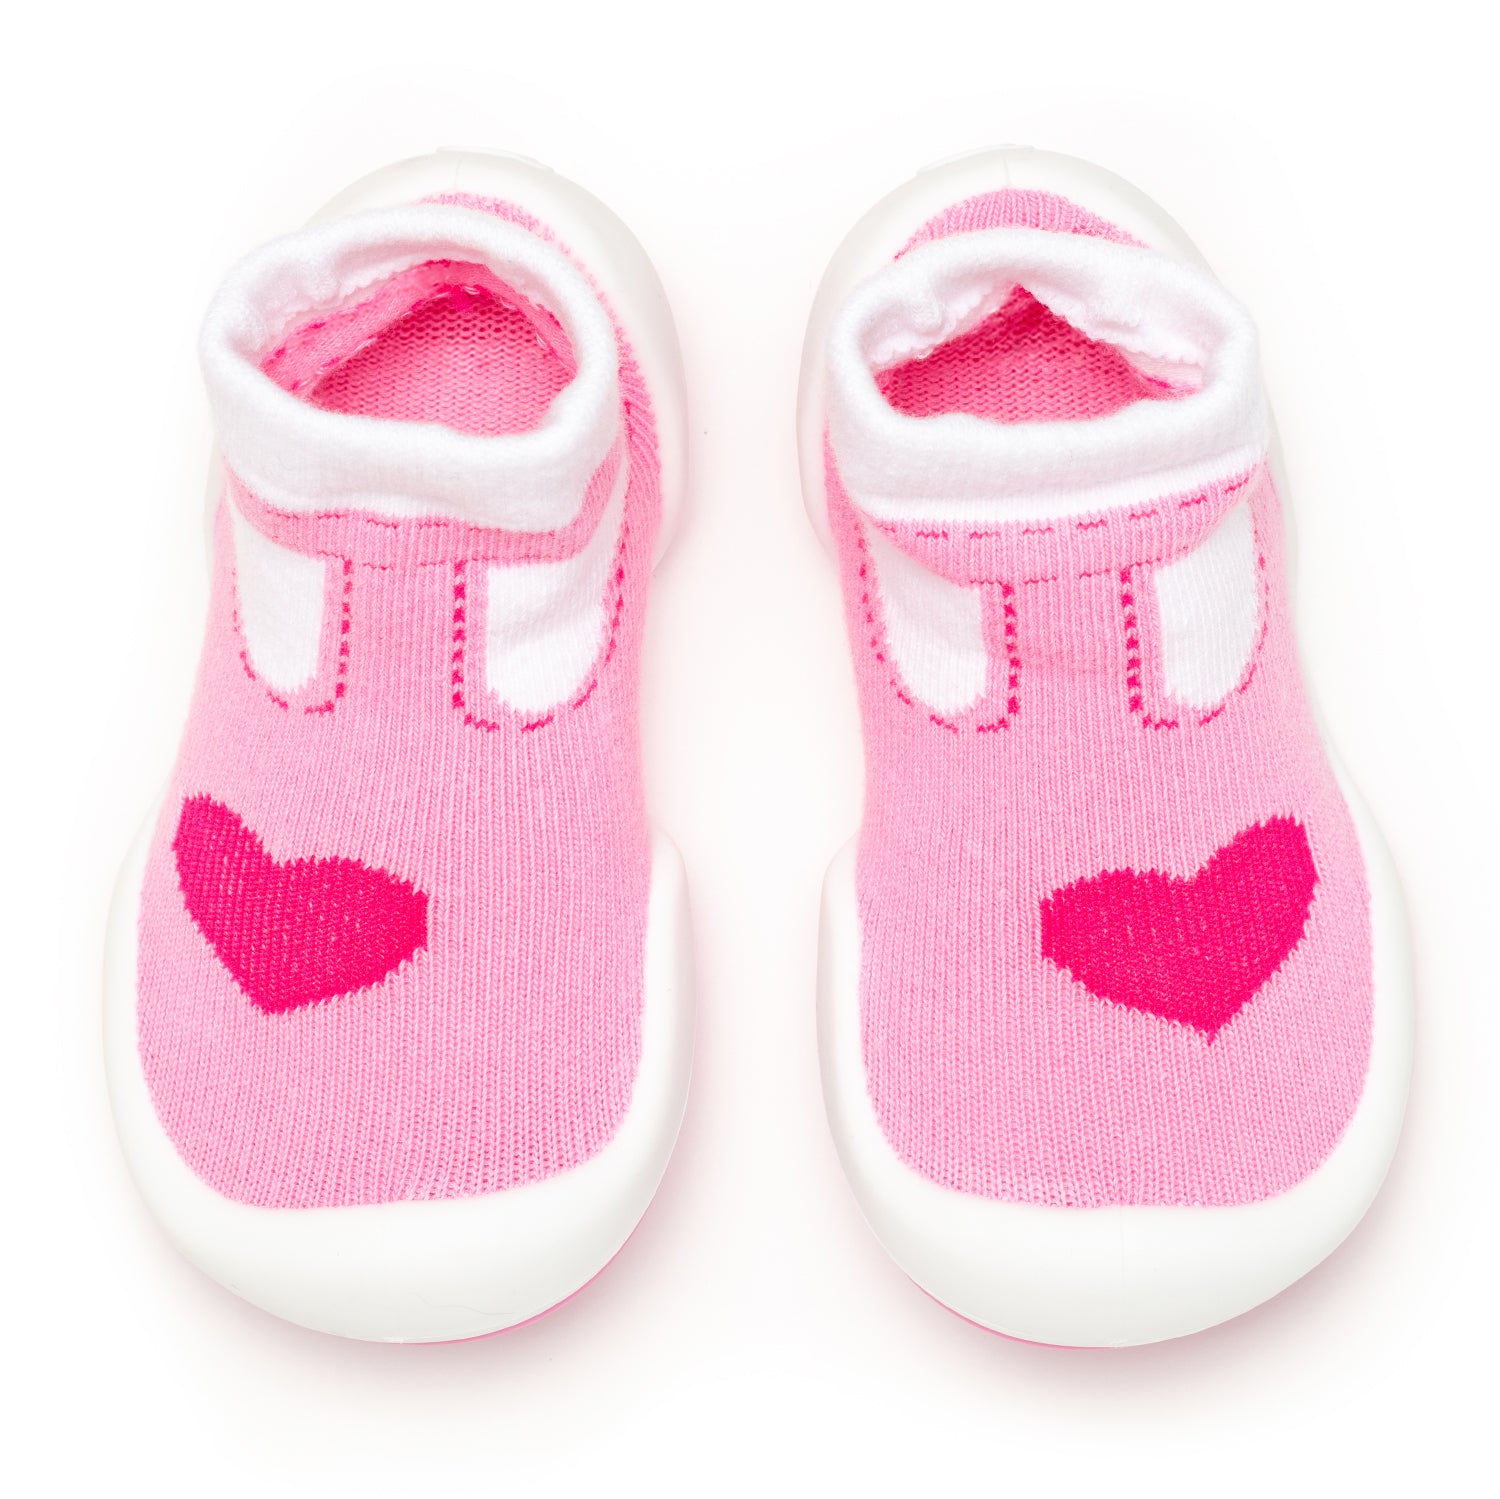 Baby Girl Socks with Mary Jane or Sneaker Shoe Look - Non-slip Gripper  Soles - 3 or 6 Pairs - Soft Cotton